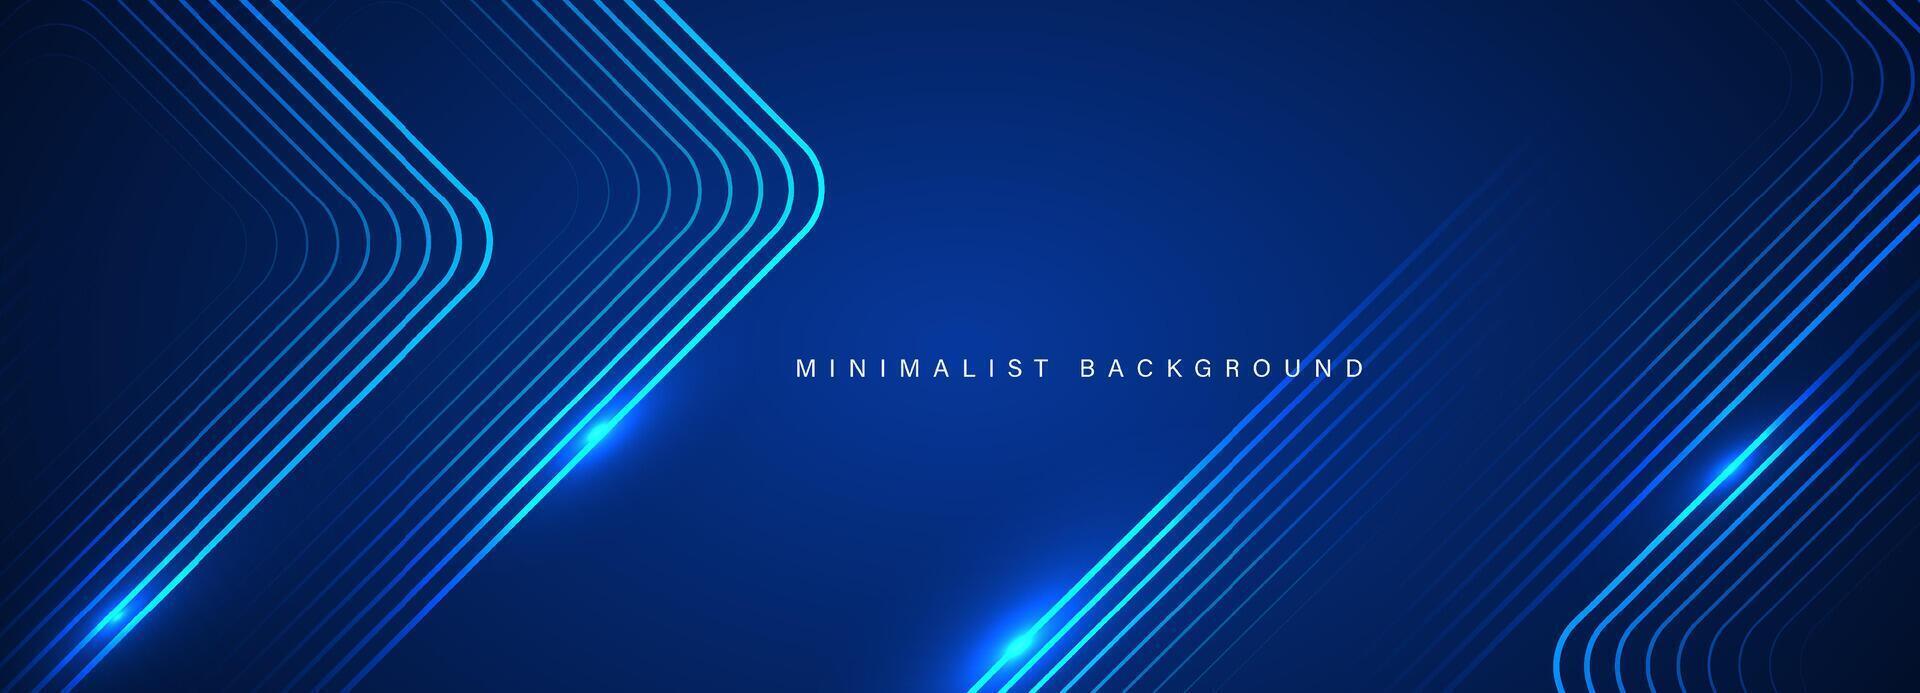 Abstract blue modern background with. Dynamic geometric shapes. Vector illustration